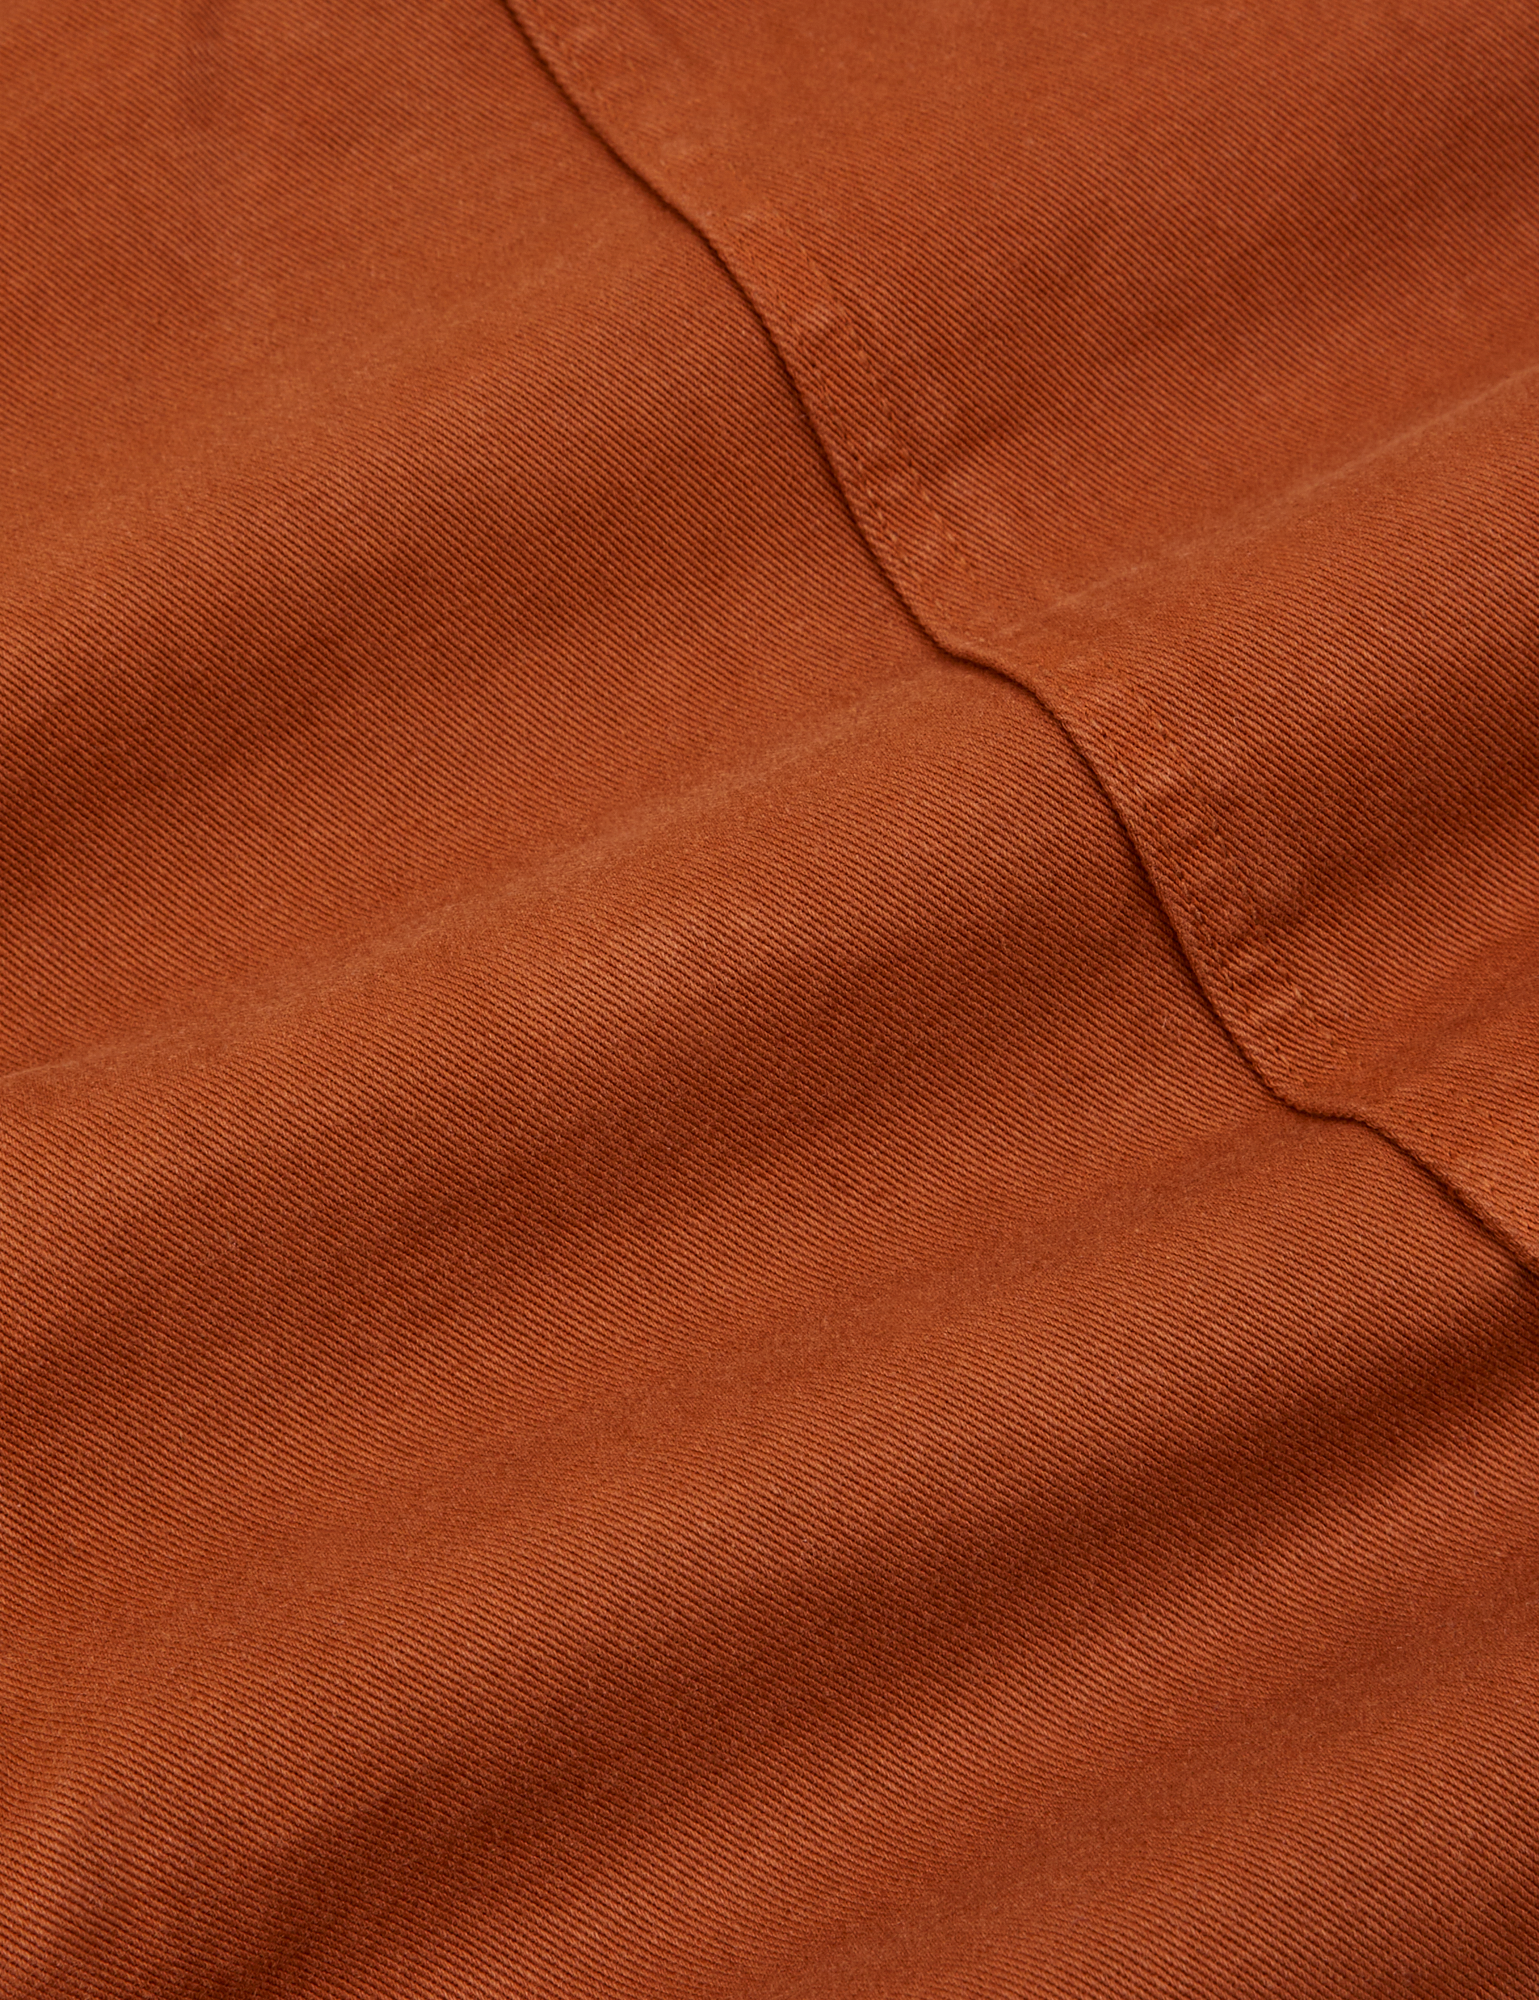 Classic Work Shorts in Burnt Terracotta fabric detail close up